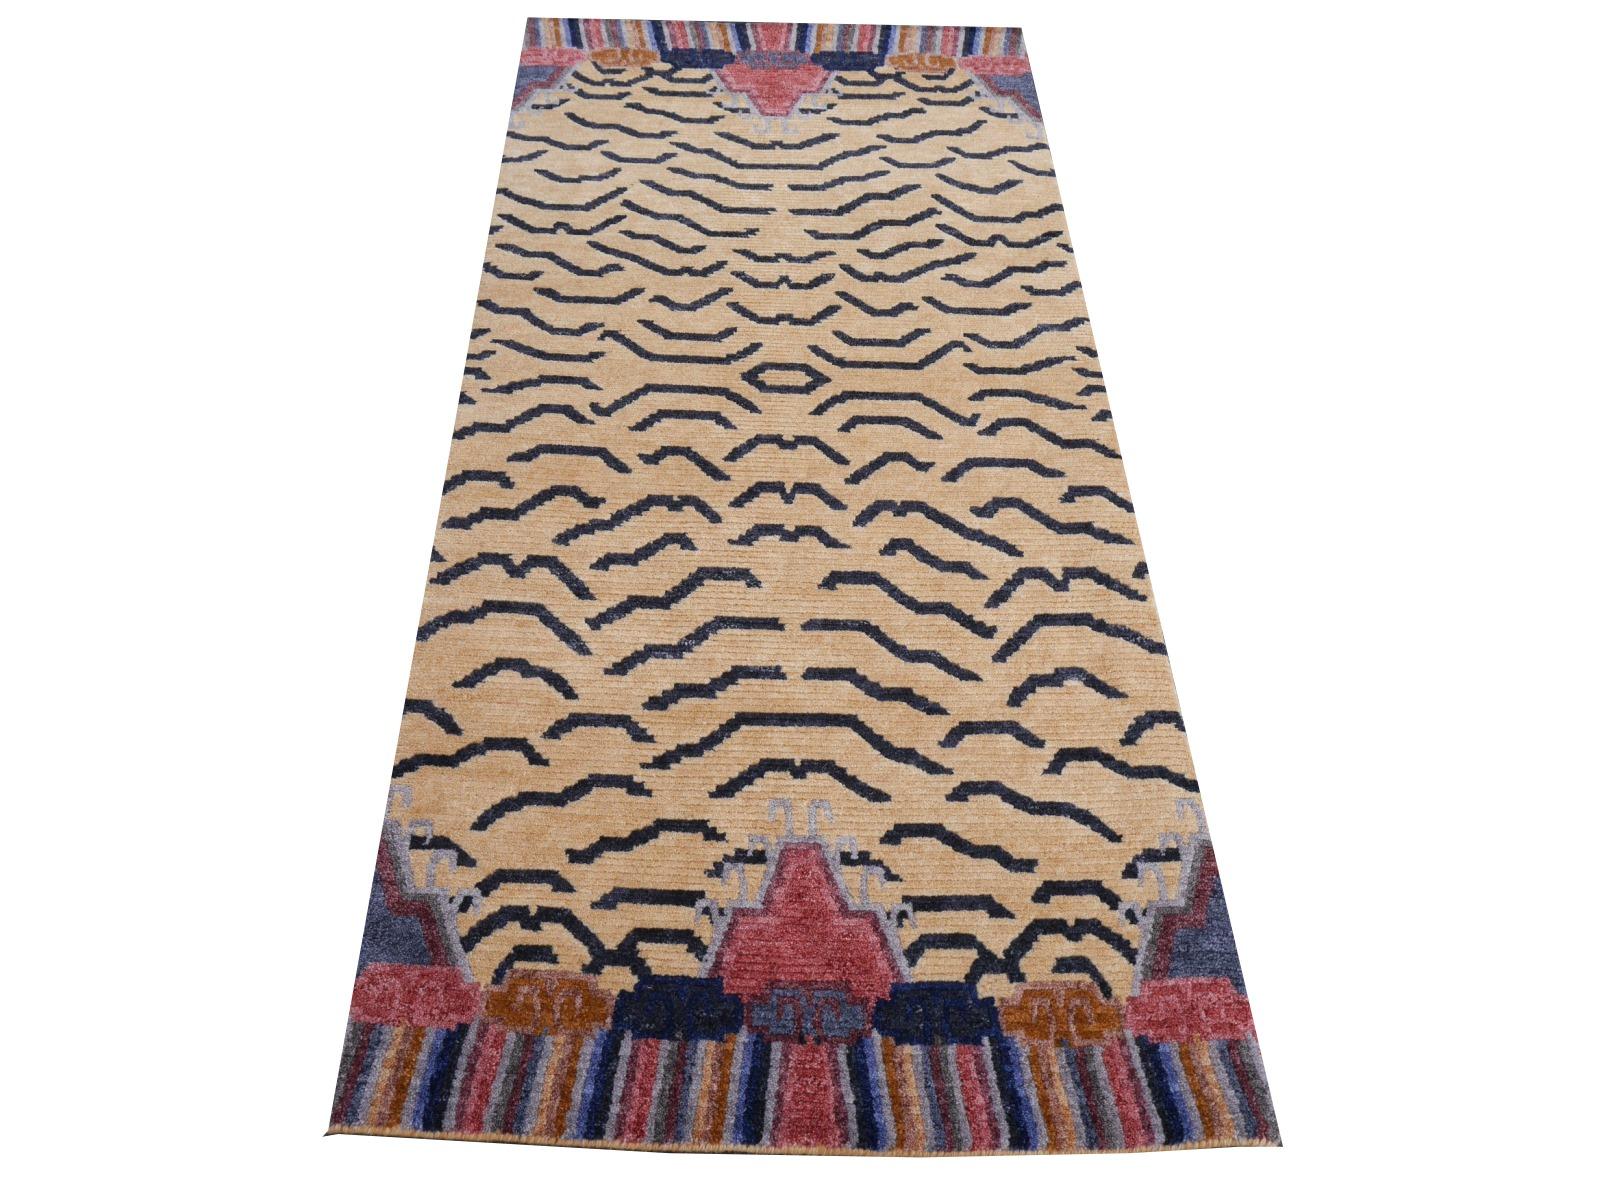 Art Deco Tibetan Tiger Rug Pure Wool Hand Knotted - Djoharian Collection Antique Design For Sale